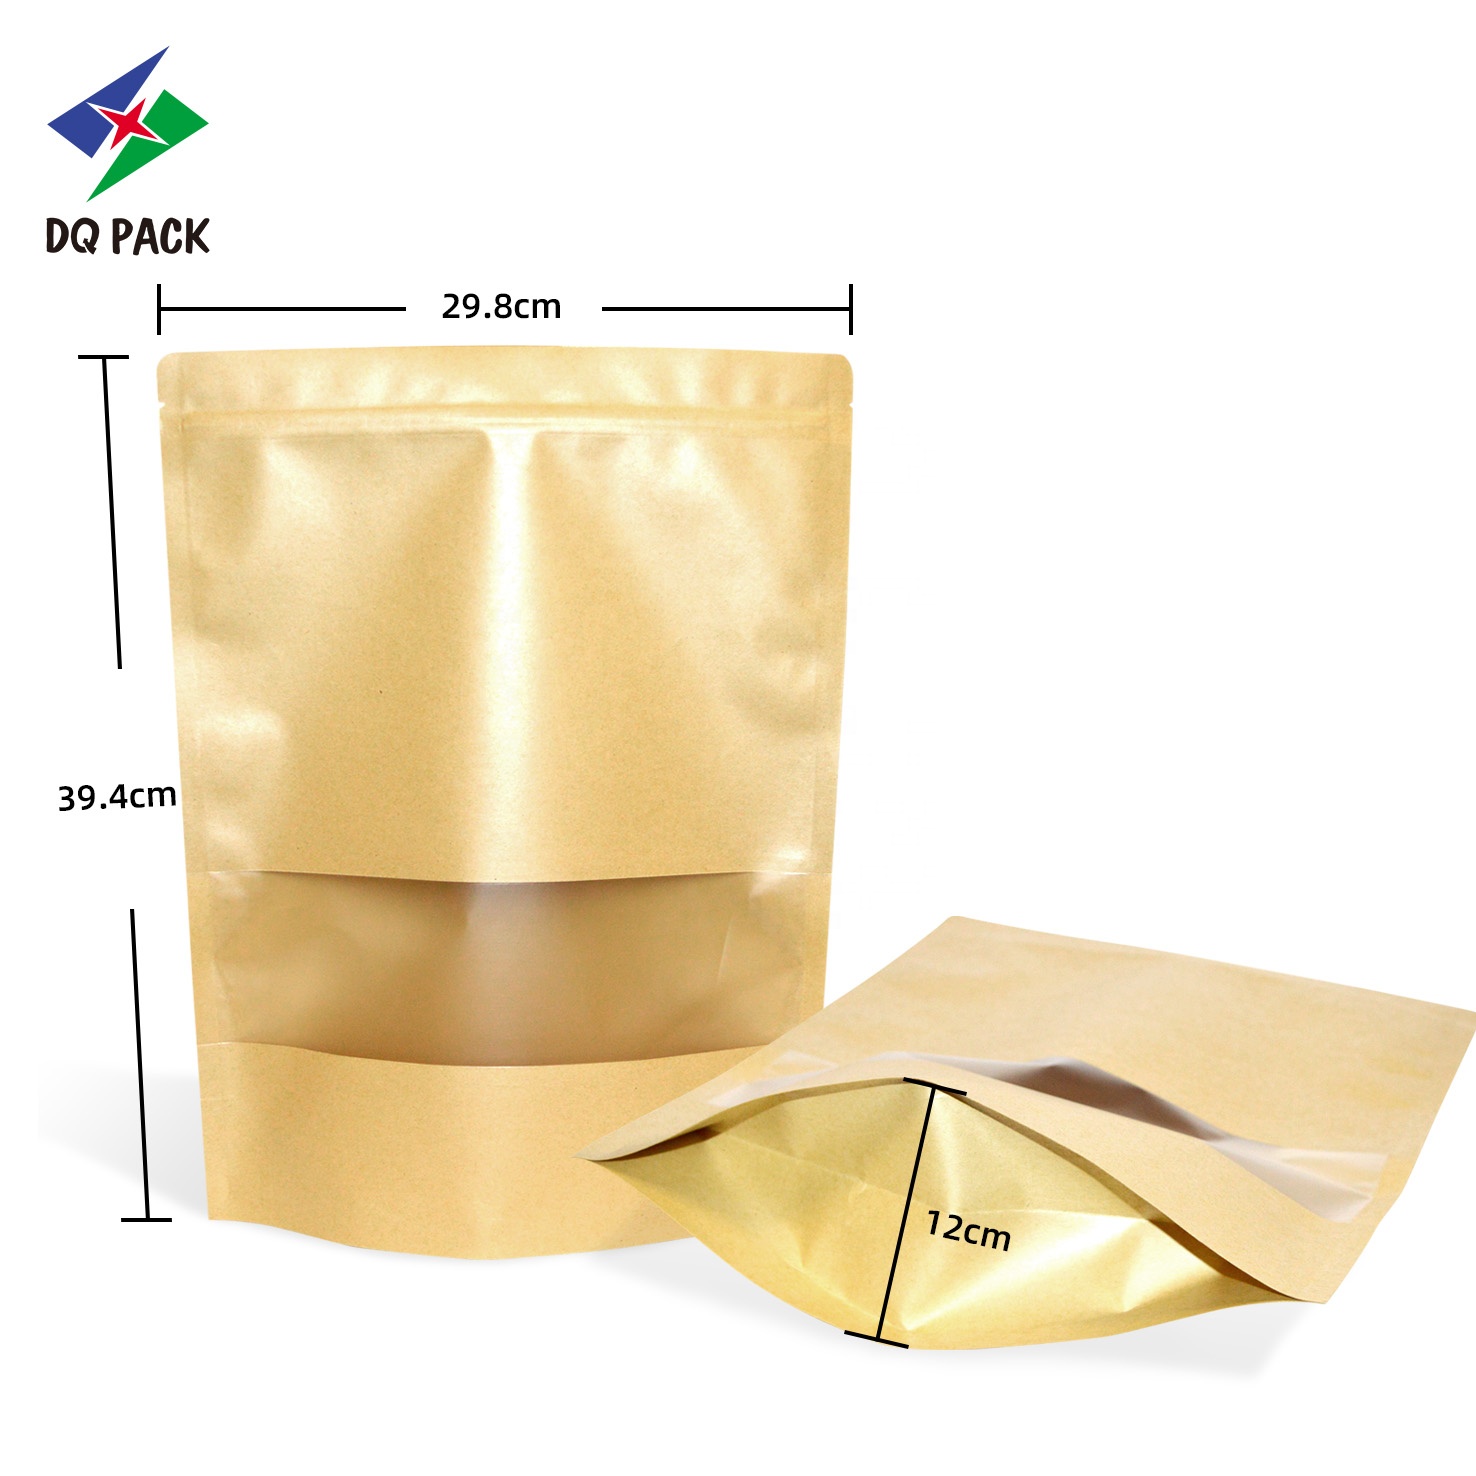 DQ PACK Factory Direct Price Moisture Proof Stand up Pouch Kraft Paper Bag Coffee tea nut food packaging bag